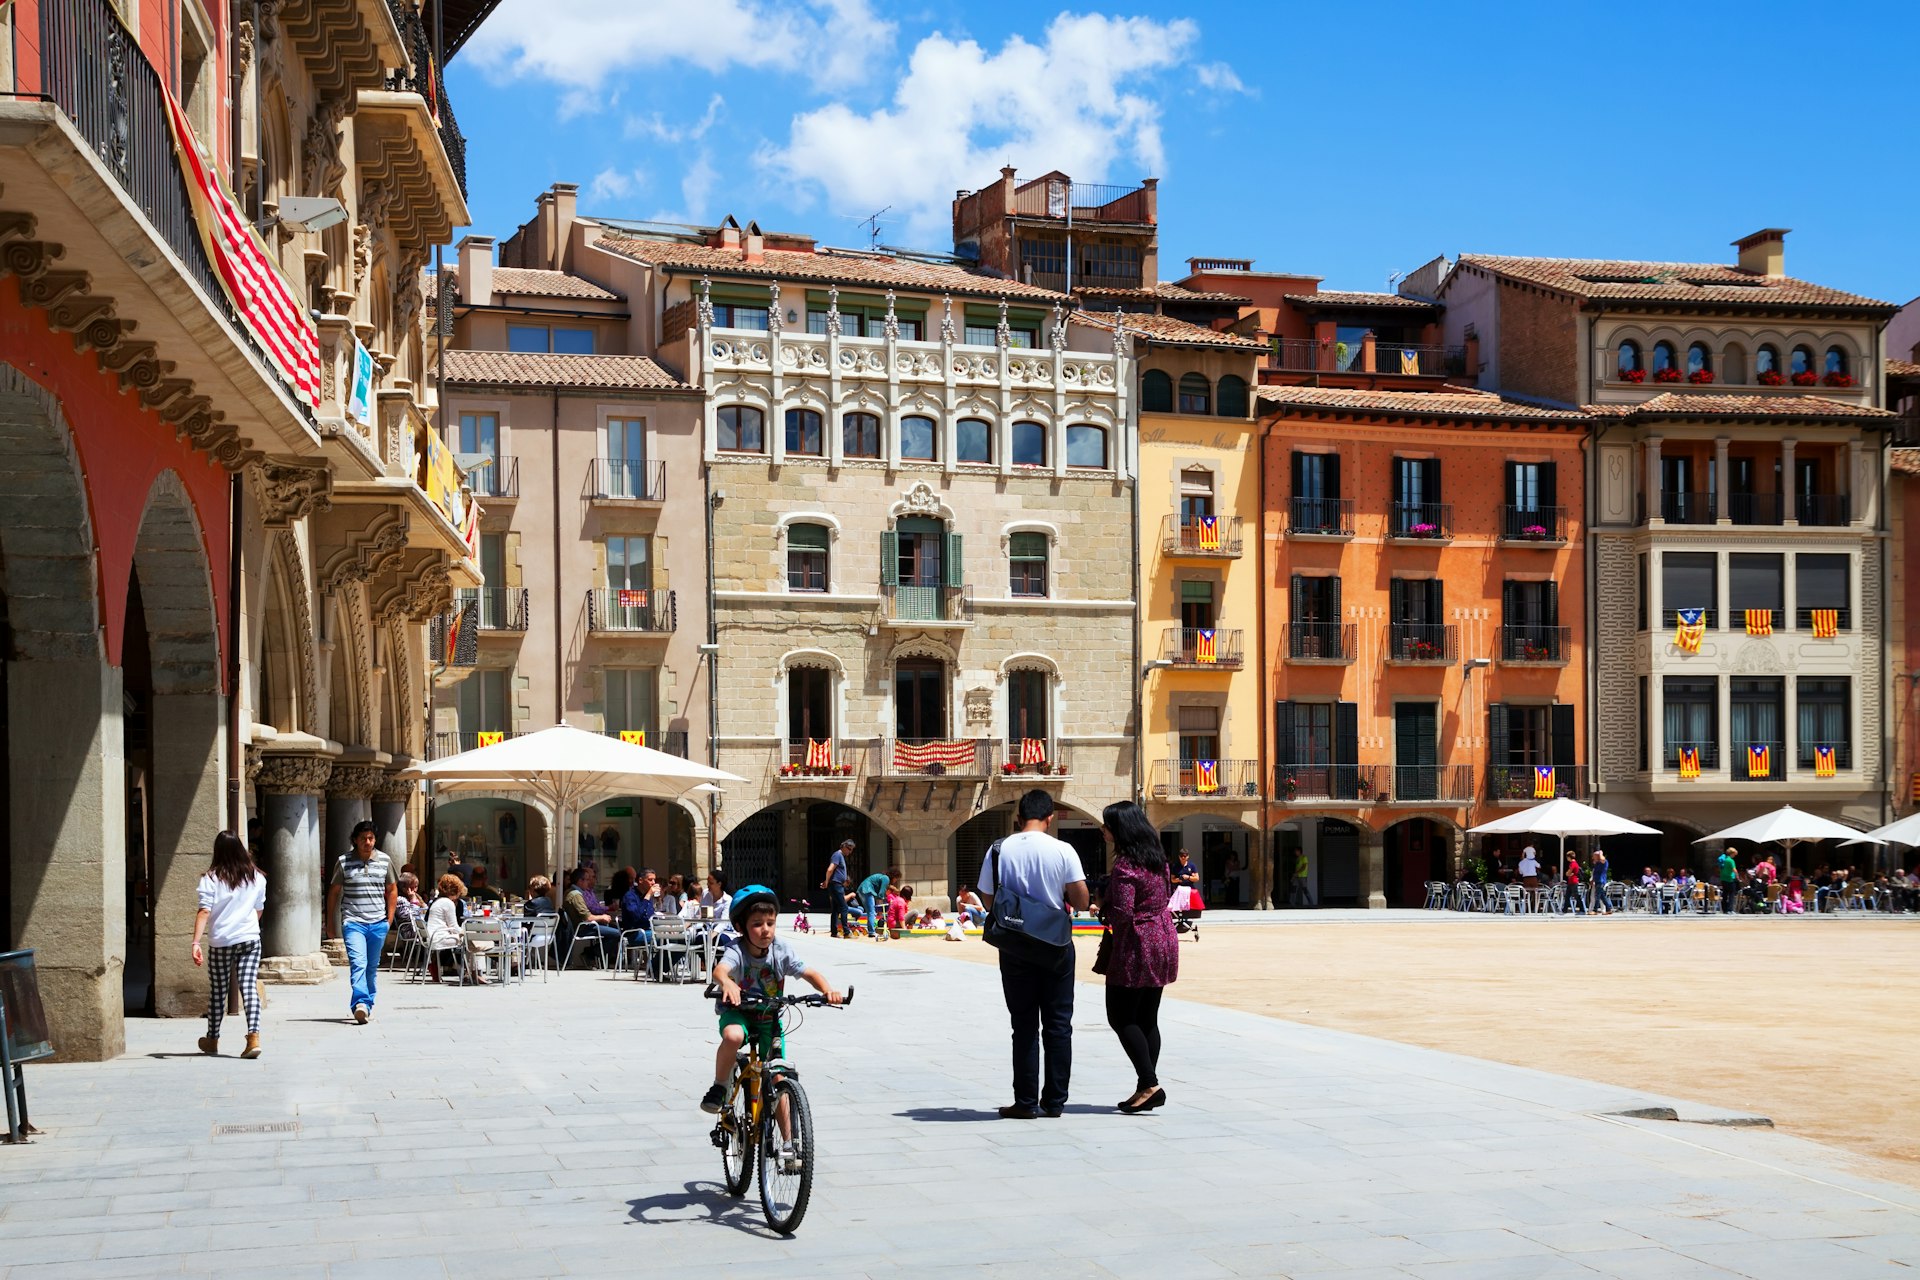 A child rides a bike and people walk around Plaça Mayor in Vic, Spain